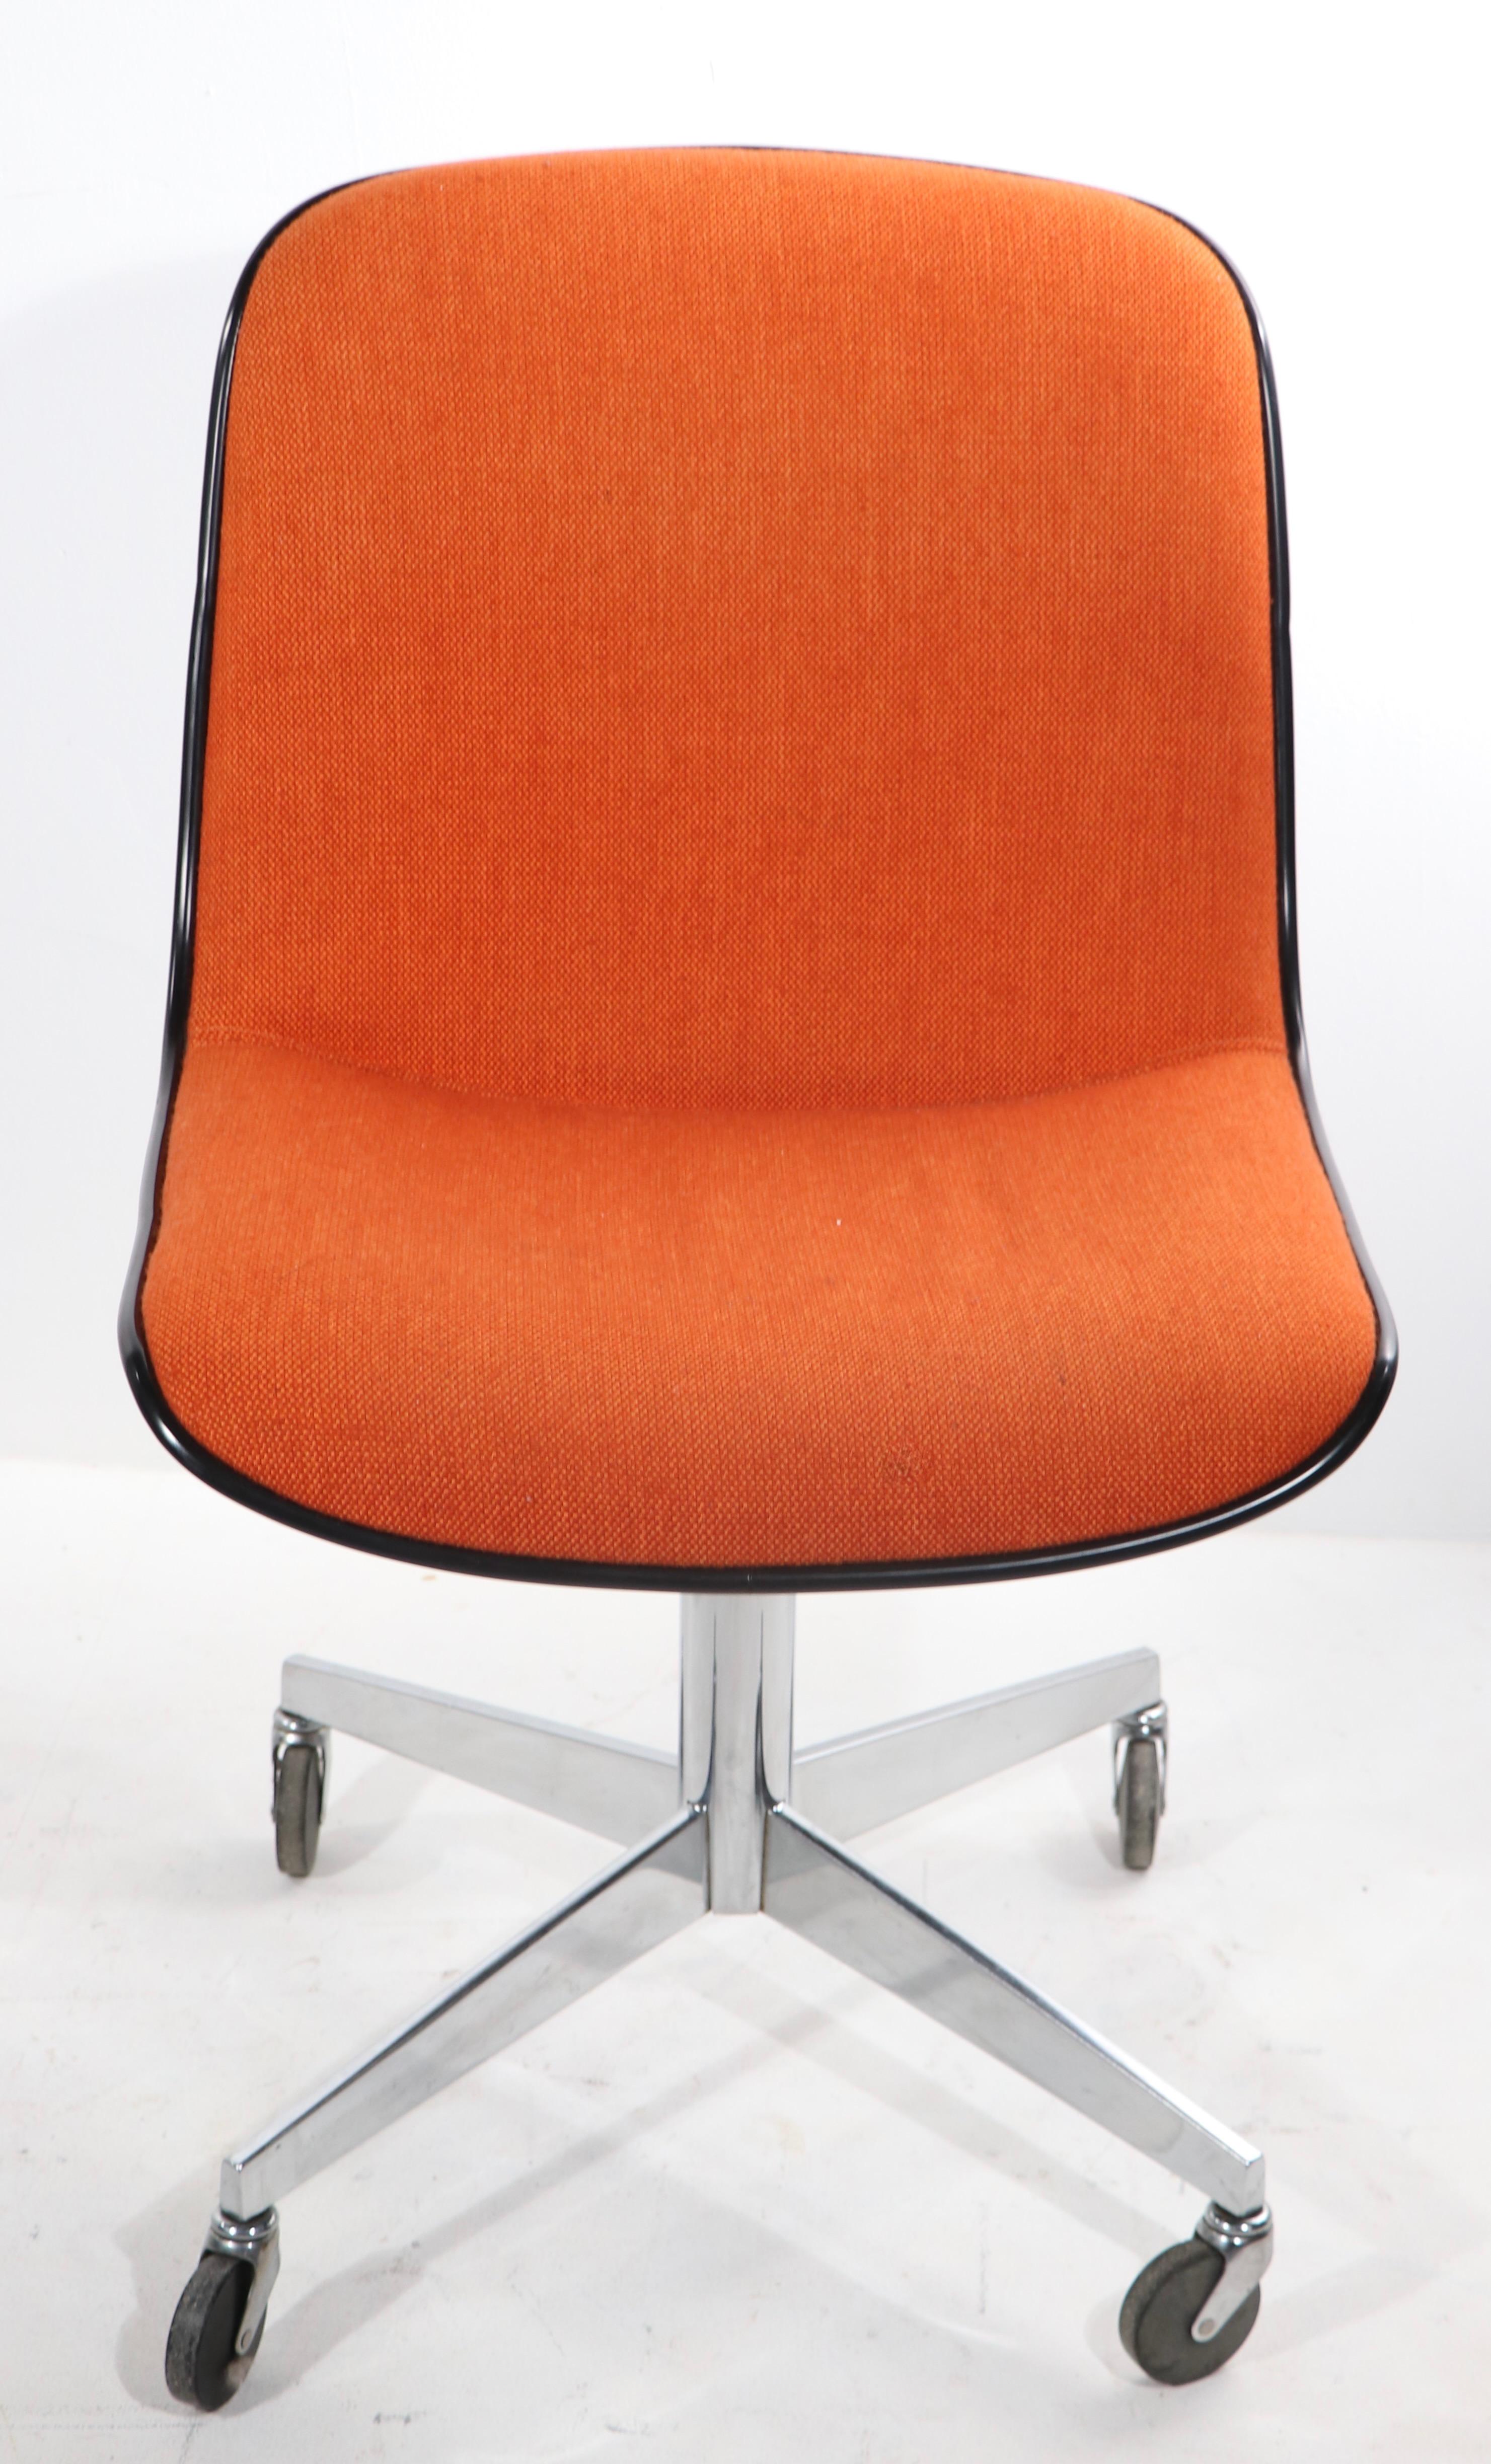 Chic architectural and ergonomic office, desk, side chair by Steelcase. This chair features a continuous seat and back in orange tweed fabric upholstery, dark grey plastic exterior shell, and chrome pedestal, four star base, mounted on wheel